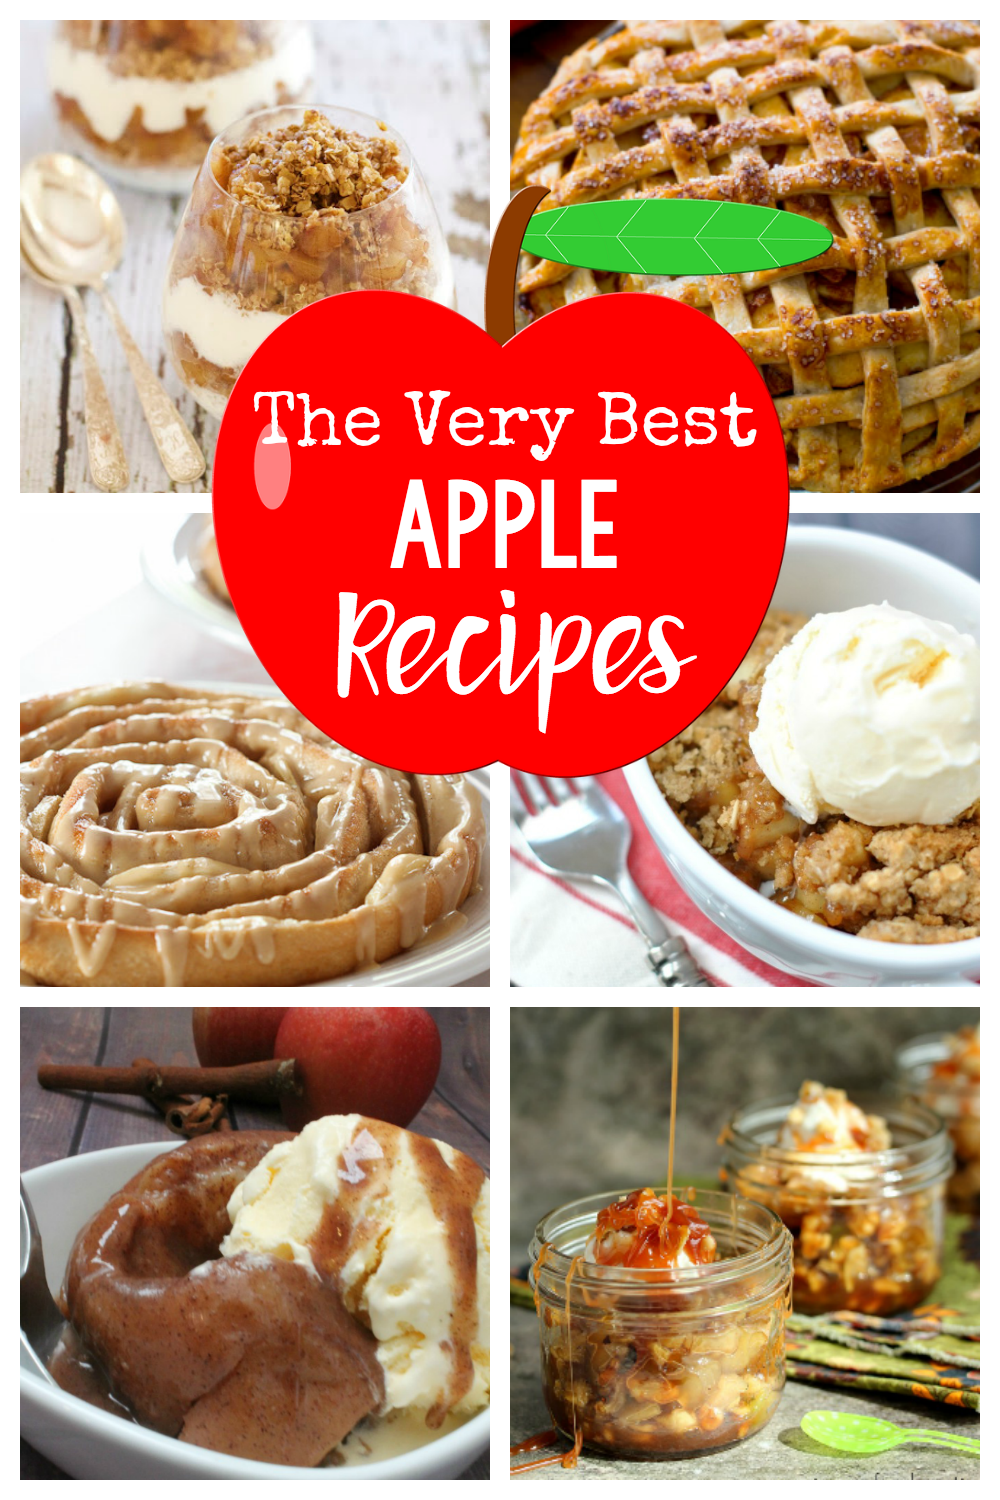 The Very Best Apple Recipes-From apple desserts to breakfast and even dinner, these apple recipes are going to make your house smell AMAZING! And they taste great too. #baking #desserts #apple #recipes